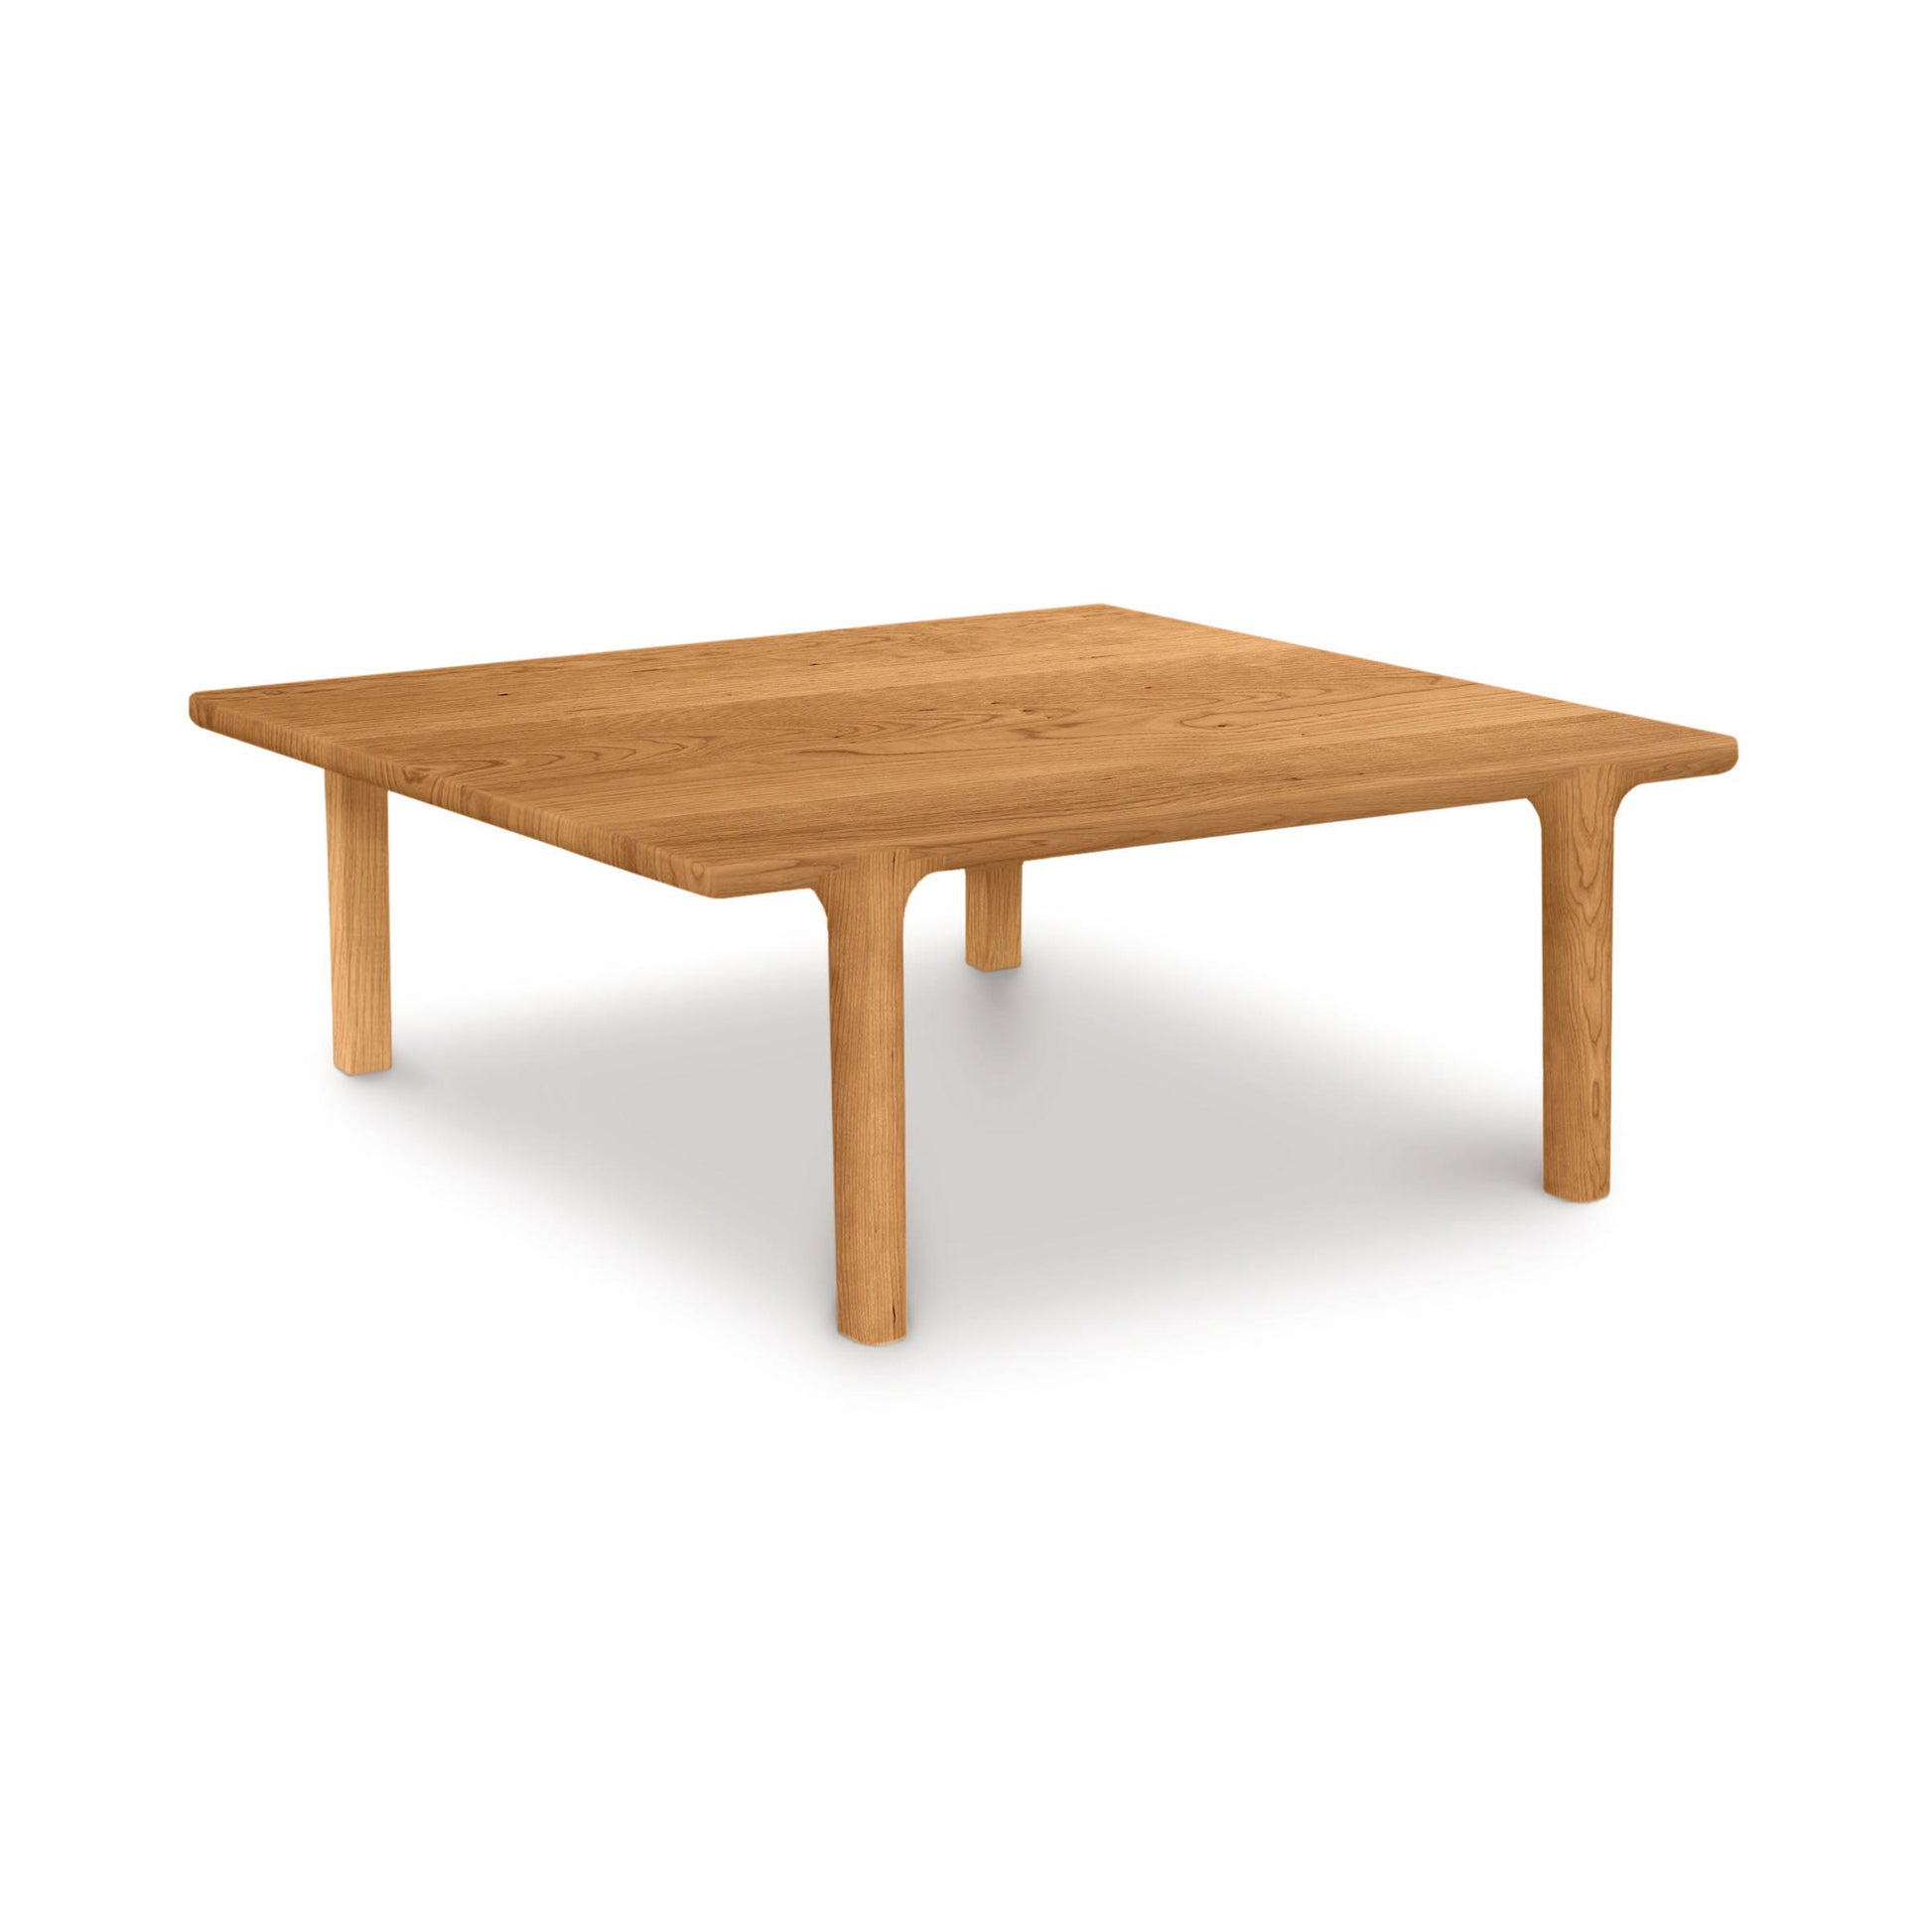 A simple Copeland Furniture Sierra Square Coffee Table with four legs and a rectangular top, isolated on a white background.